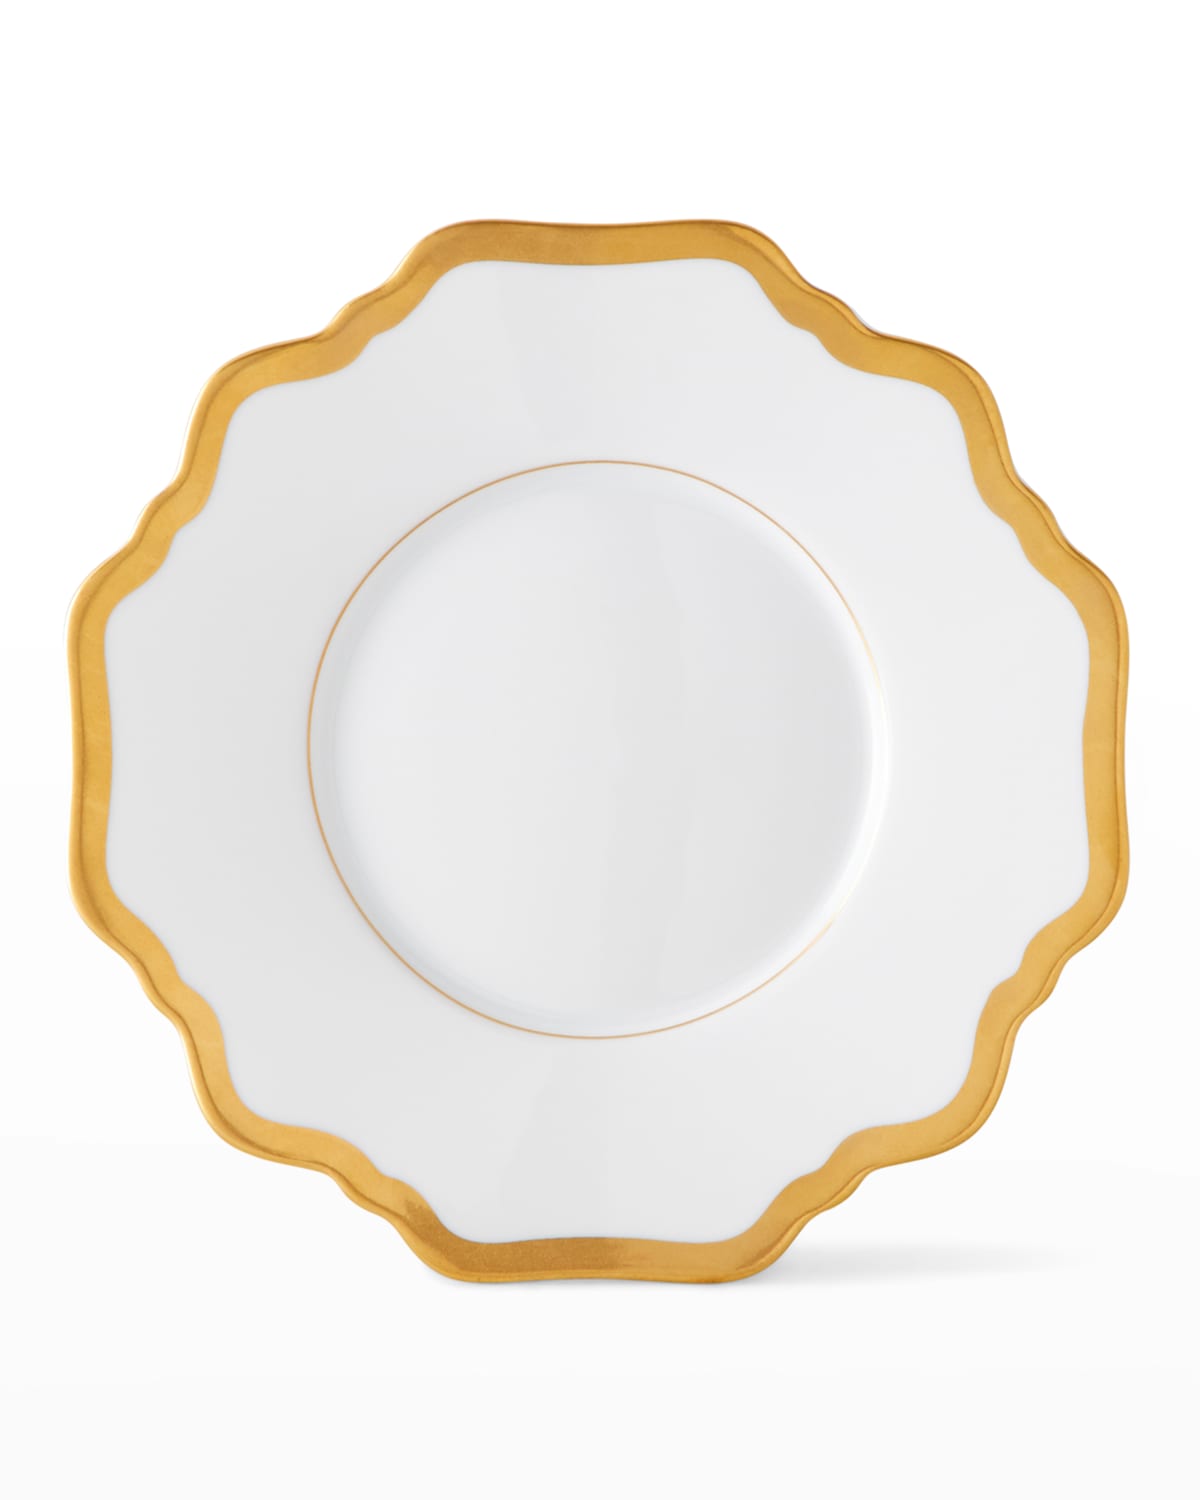 Anna Weatherley 22k Gold Rimmed Saucer In Multi